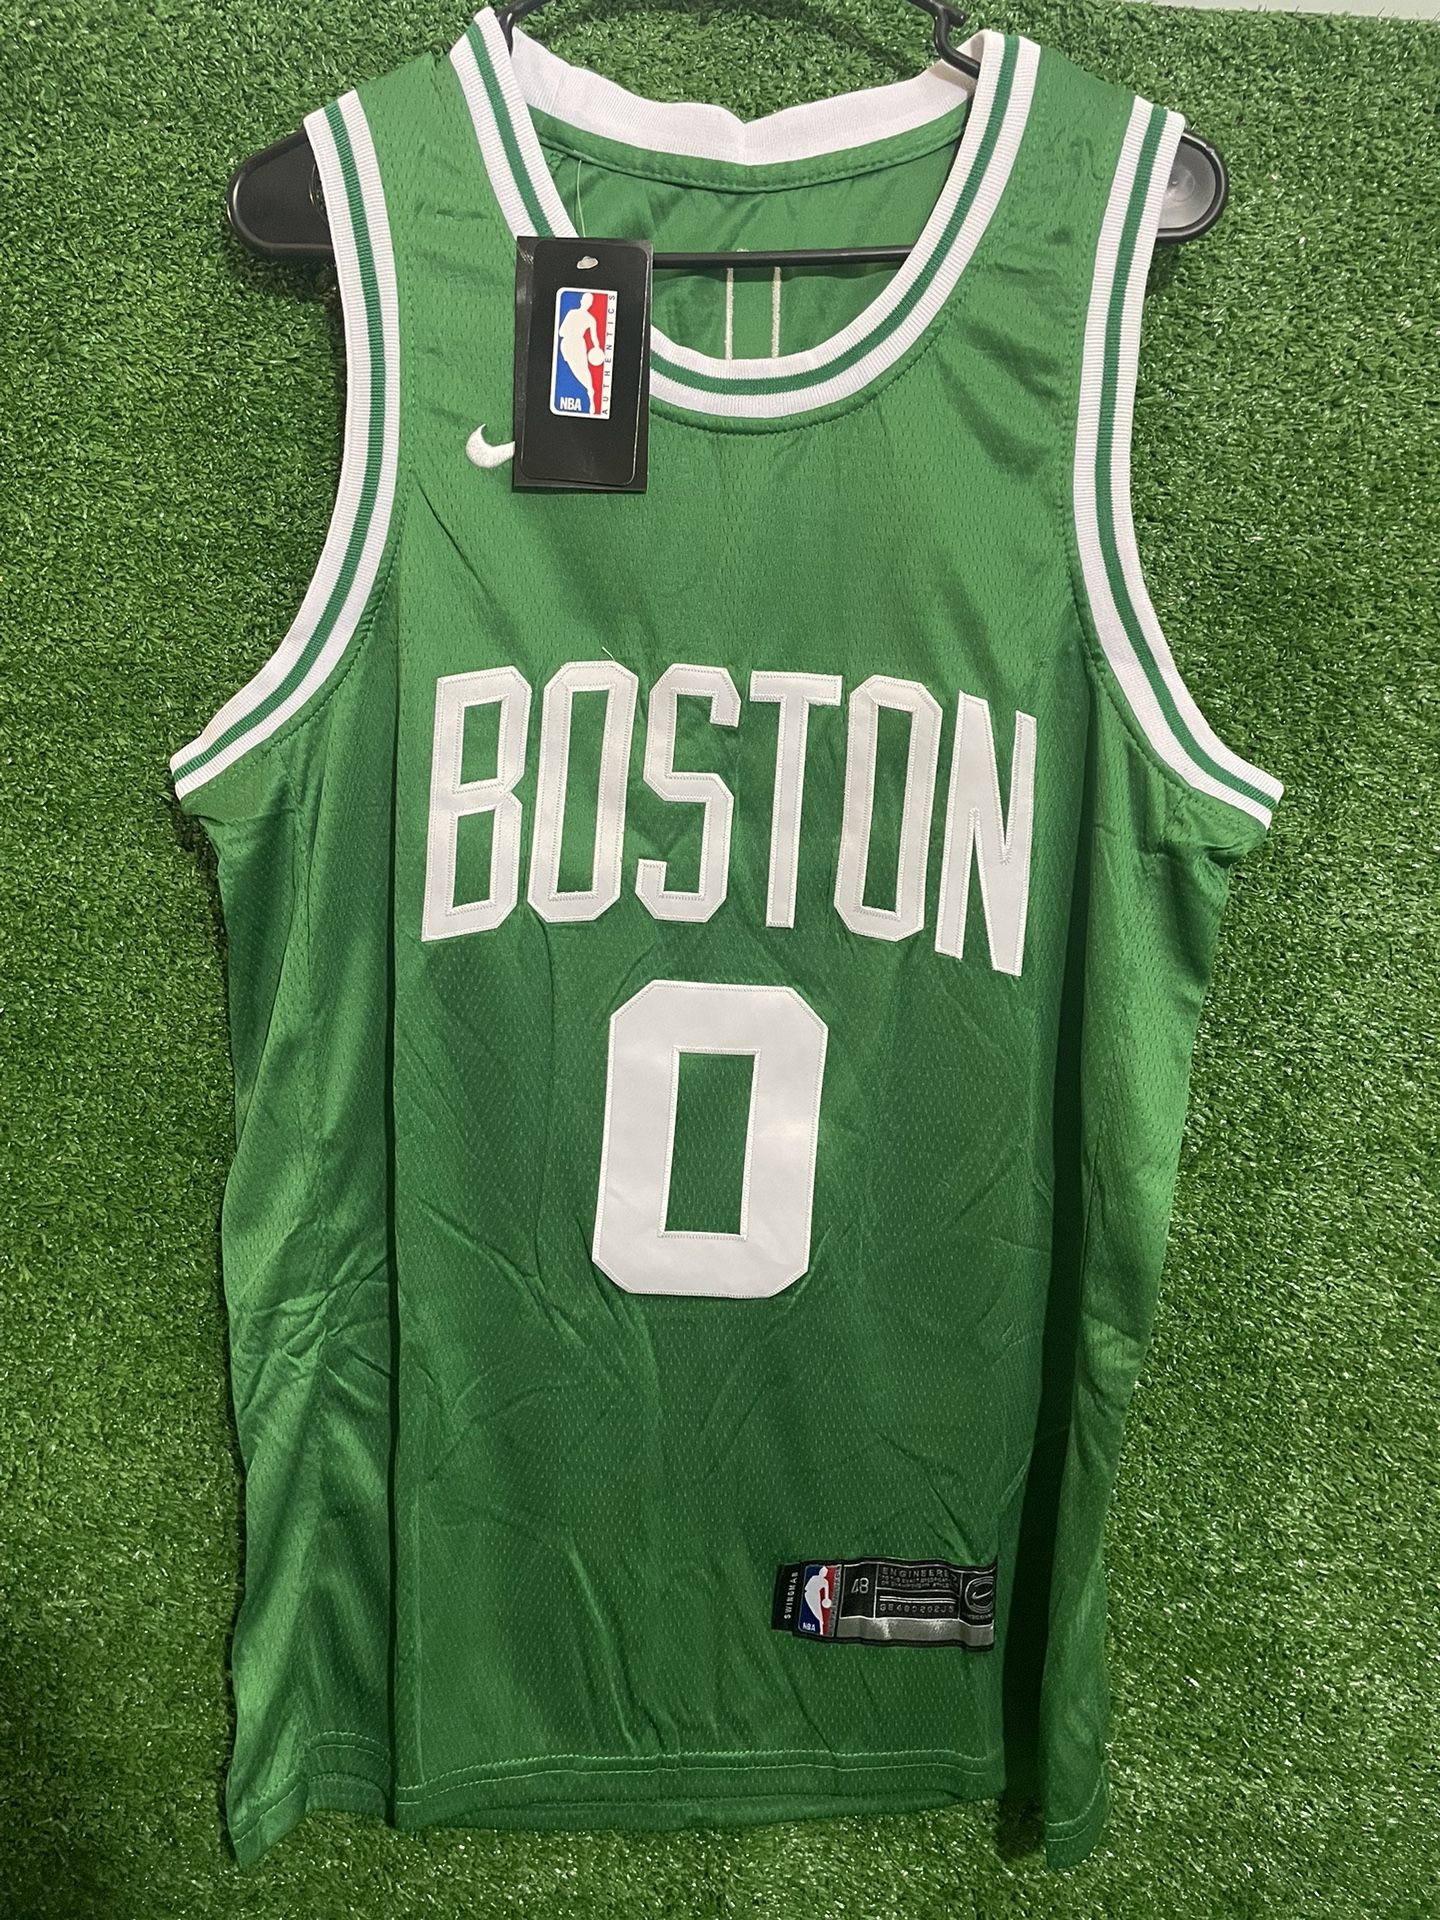 NBA Jerseys Sizing Guide of Different Brands size L-XL